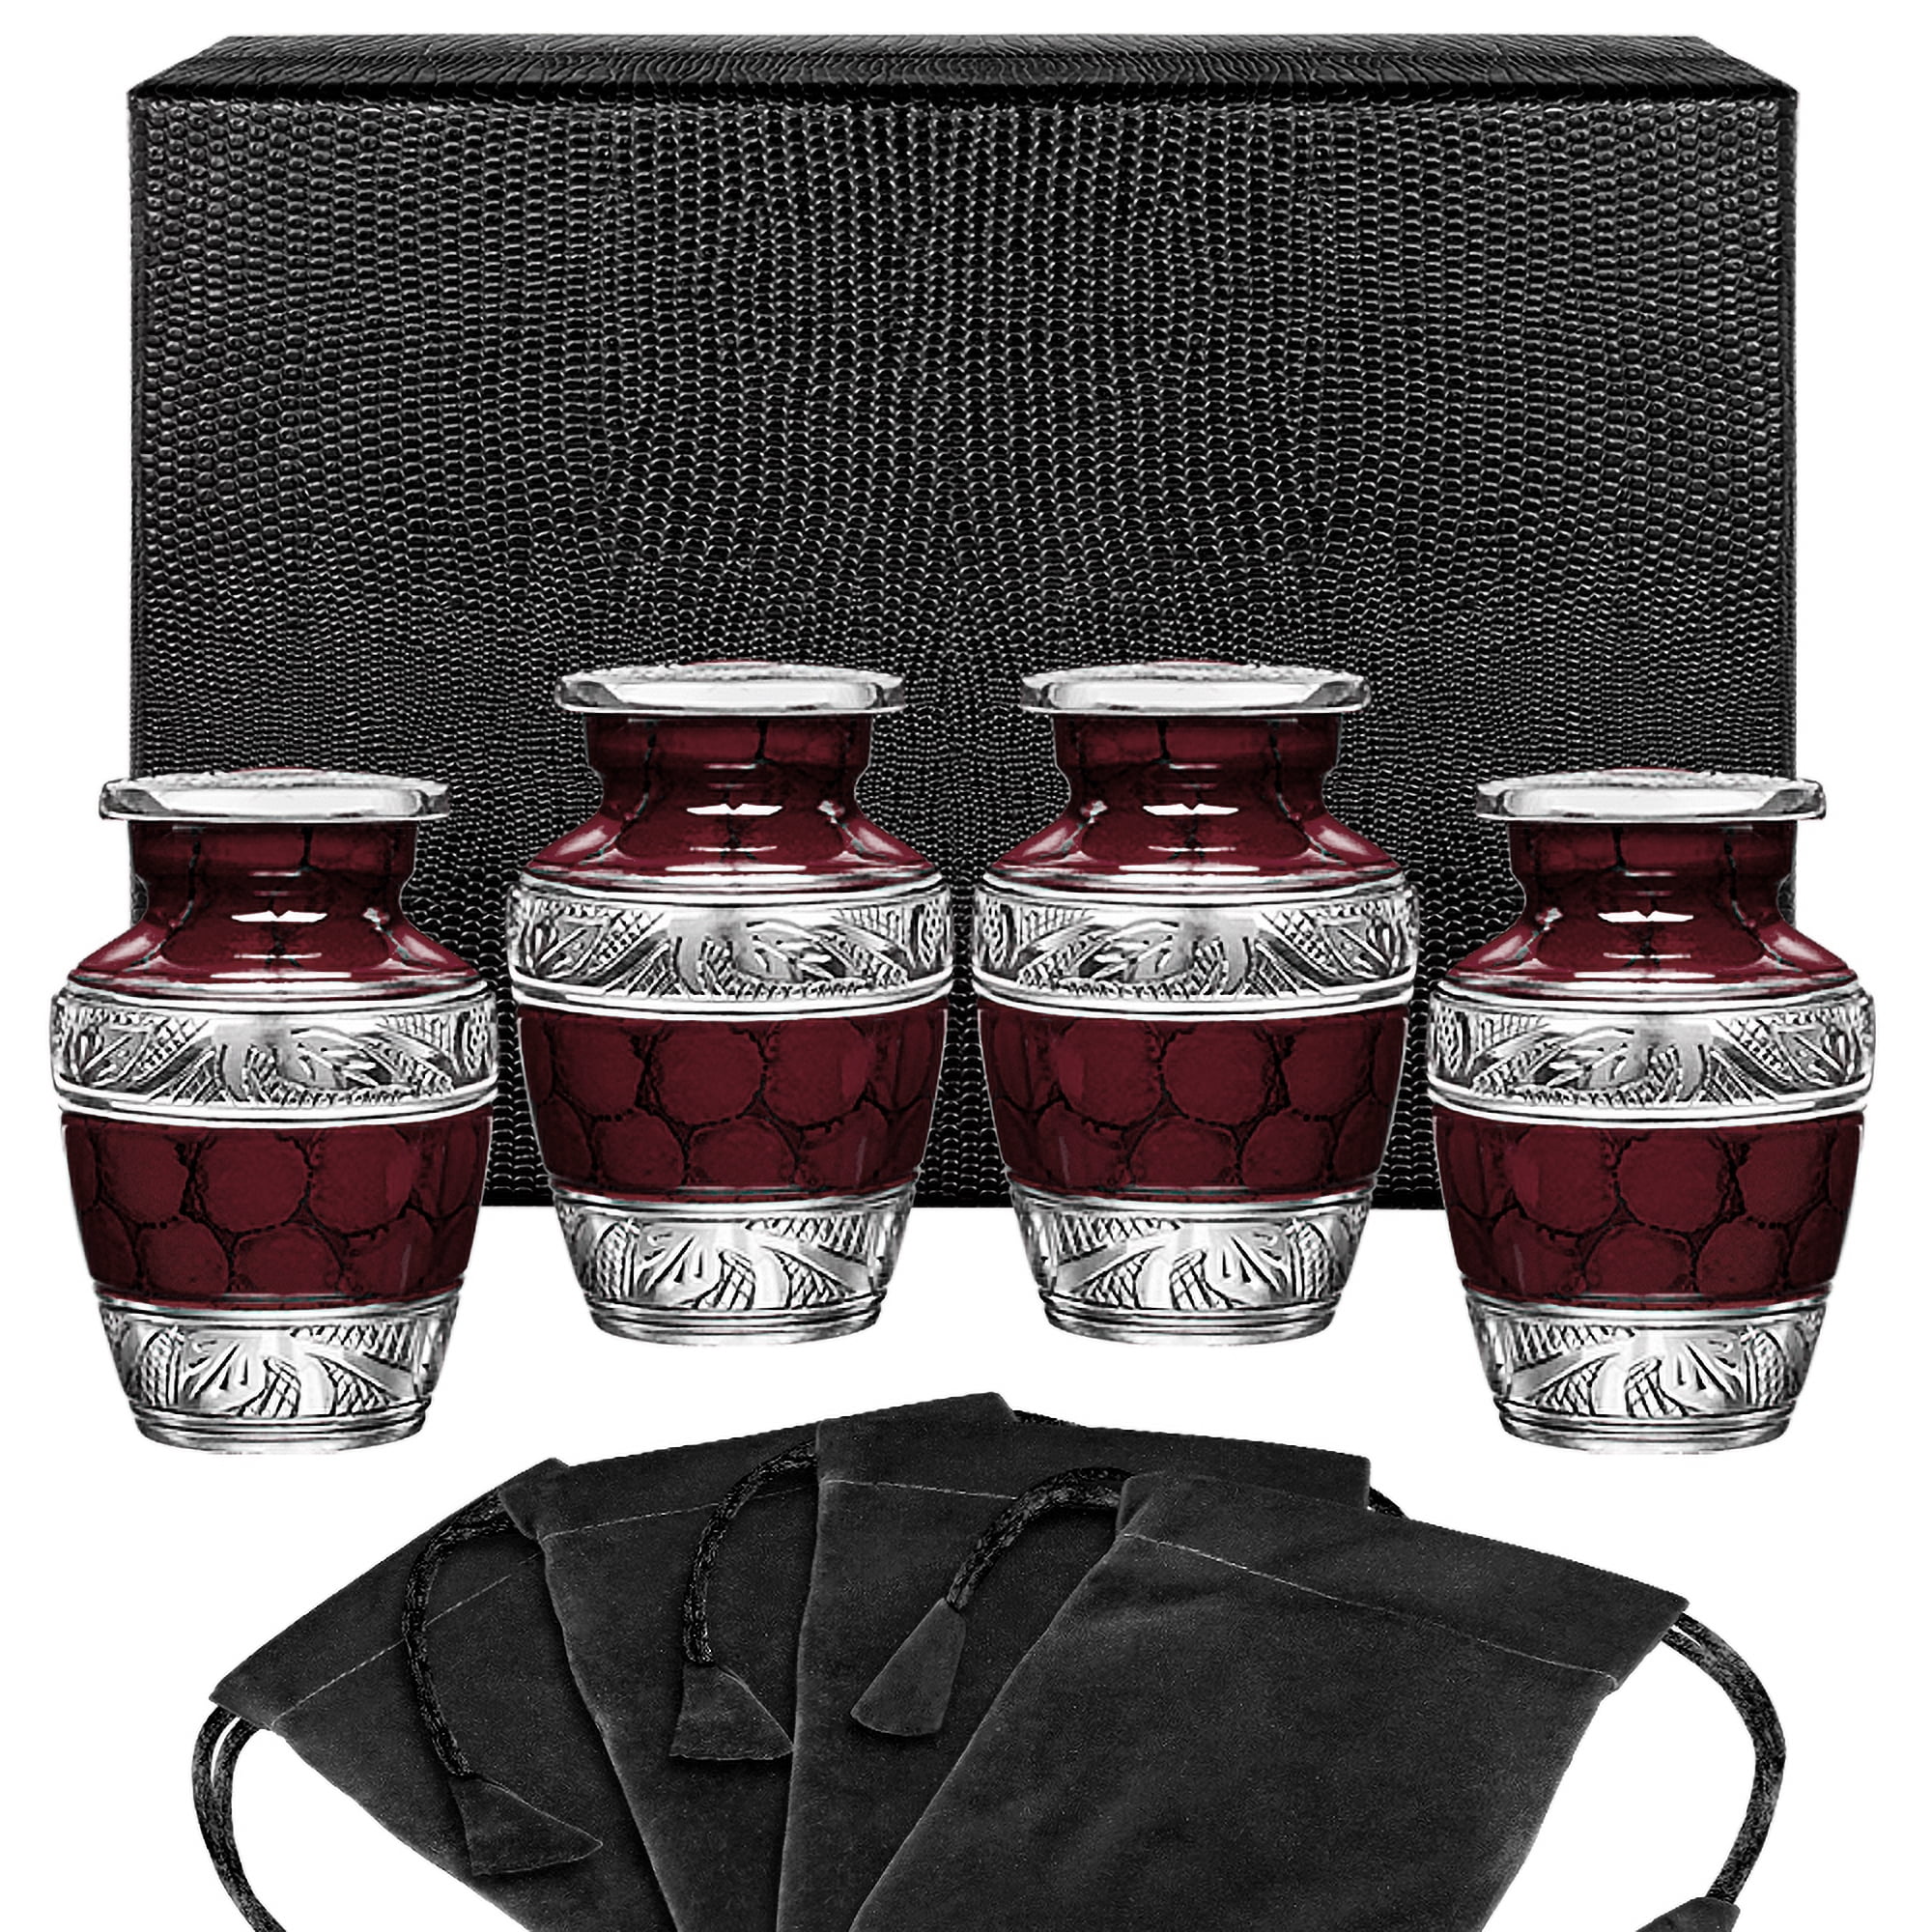 Small Keepsake Urns Handcrafted Mini Urns Set of 4 with Velvet Box & Bags Honour Your Loved One with Keepsake Urn for Ashes Muticoloured Keepsake Cremation Urns Perfect for Adults & Infants